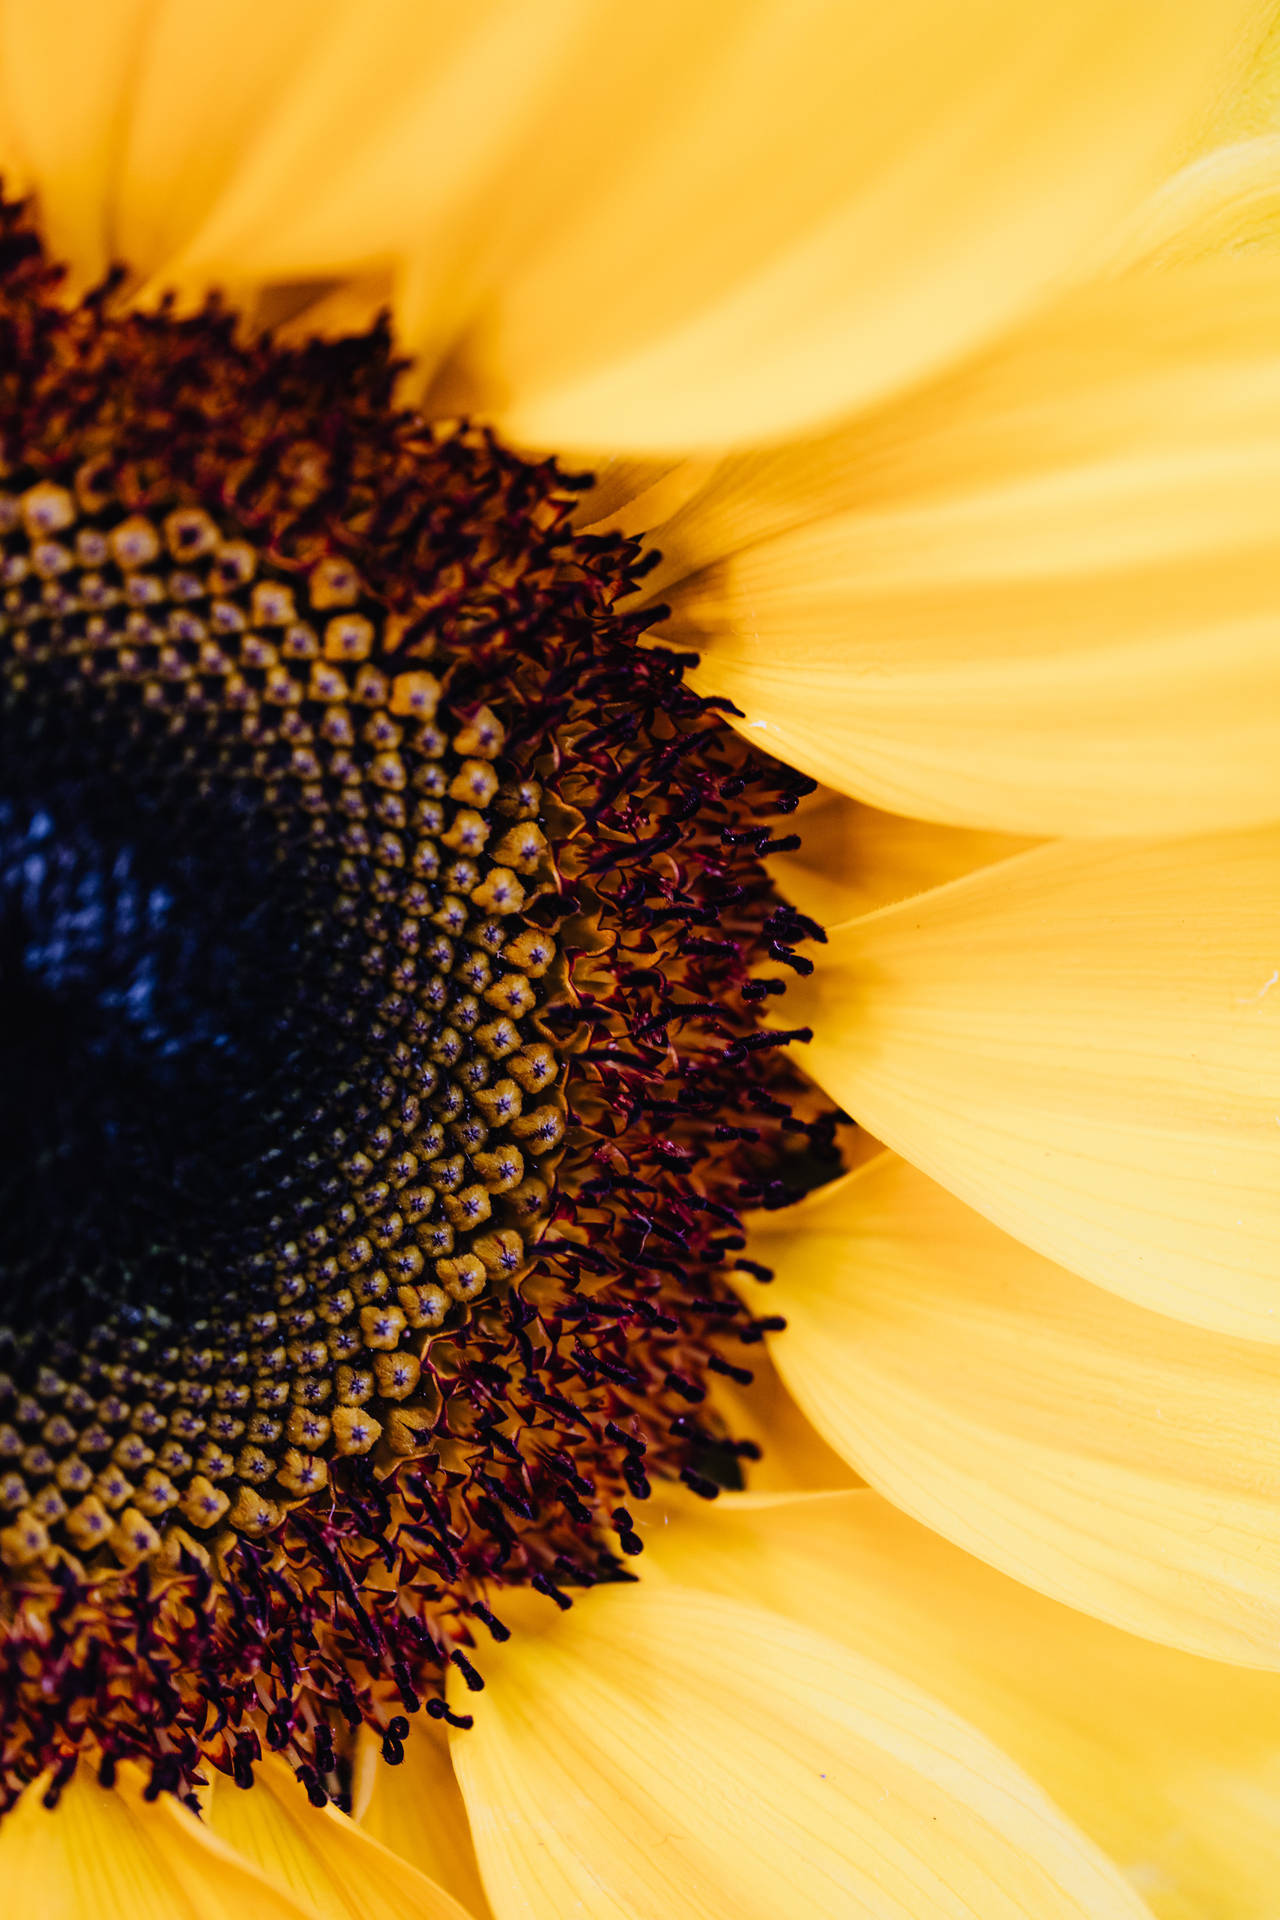 Download A 4k Iphone 6 Plus Sunflower Close-up Wallpaper 